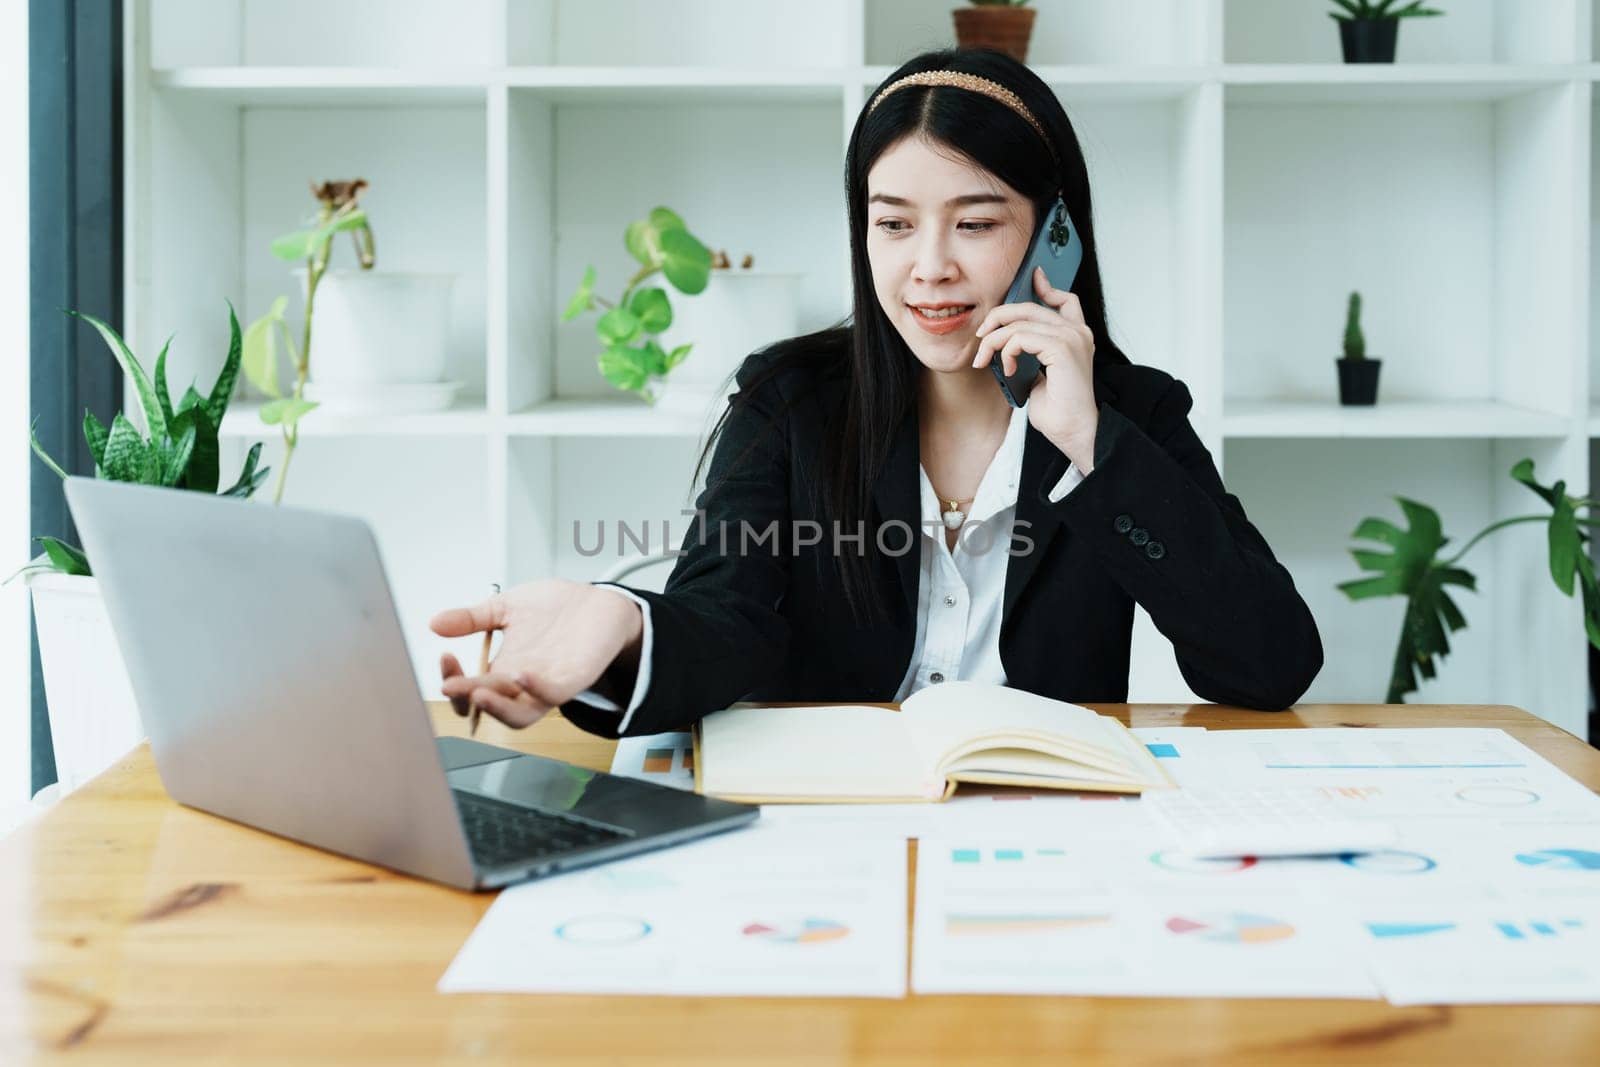 Portrait of a young Asian woman showing a smiling face as she uses her phone, computer and financial documents on her desk in the early morning hours by Manastrong